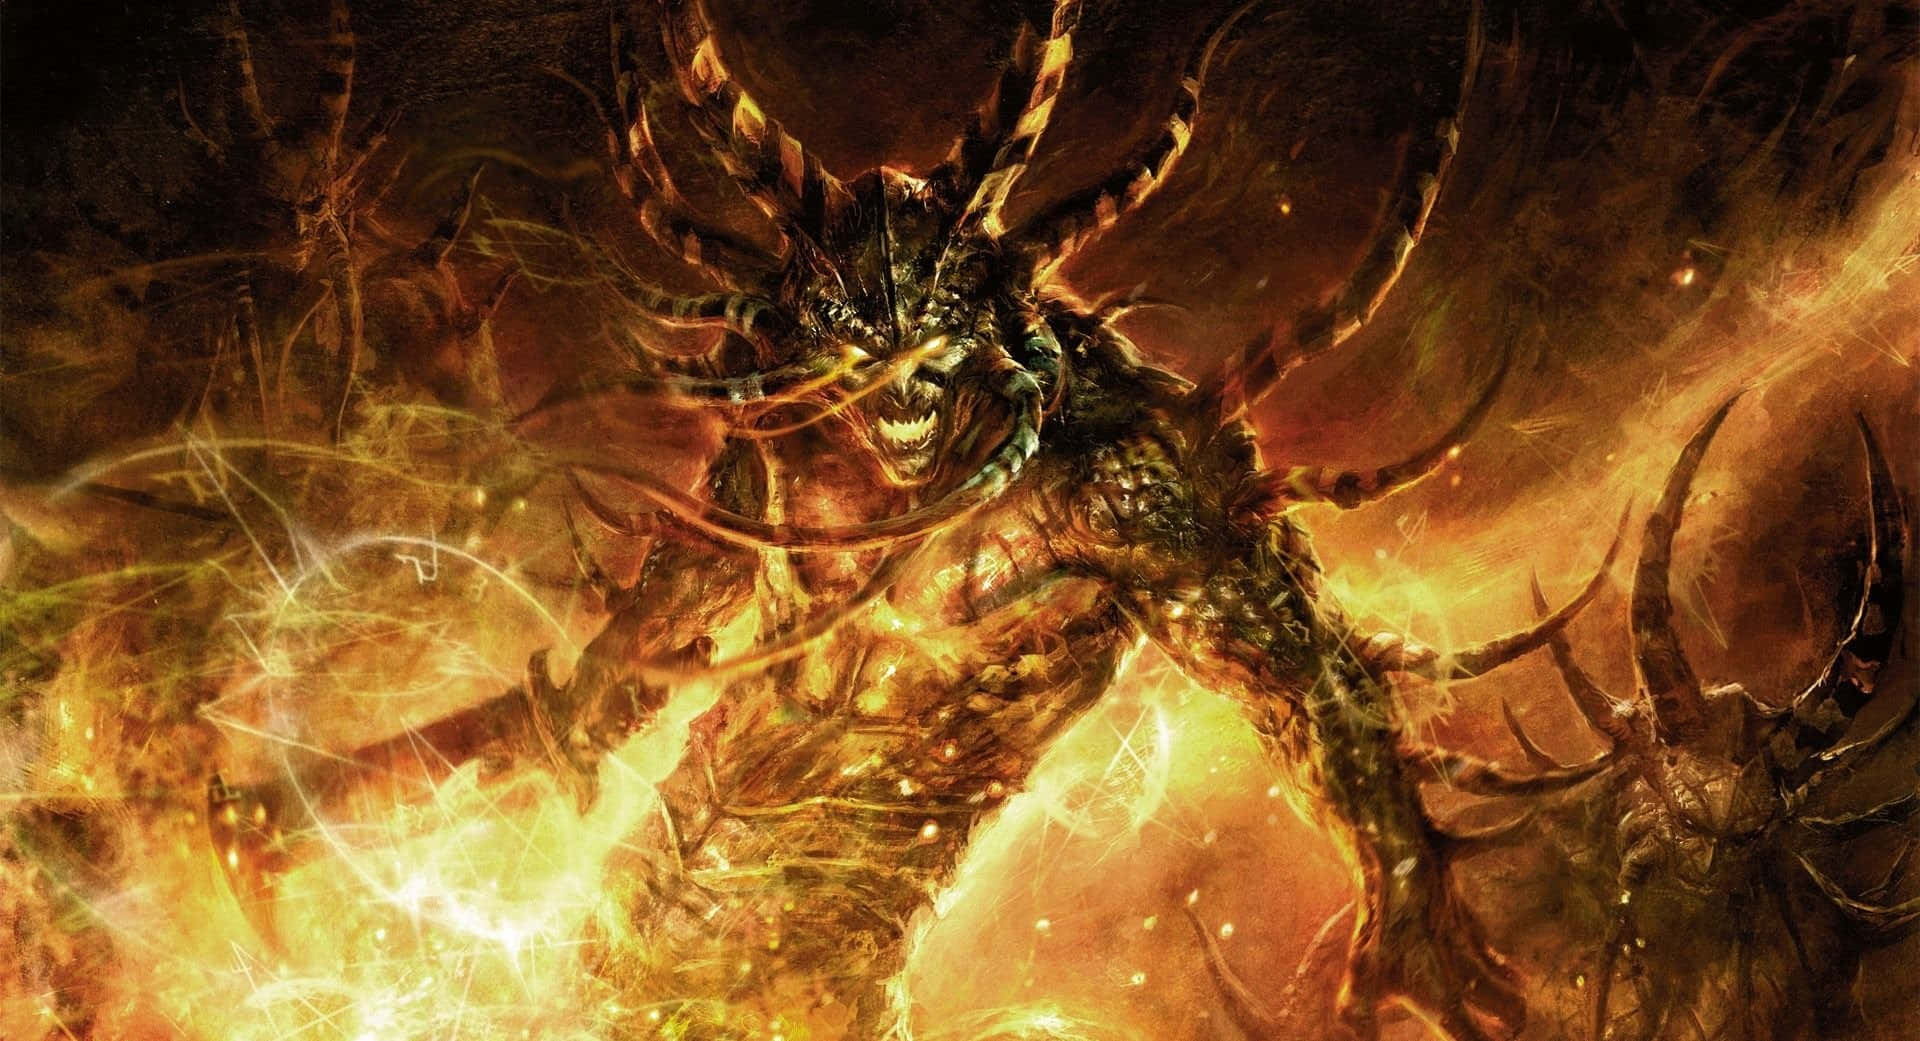 Cool Demon with Intense Gaze and Flames Wallpaper